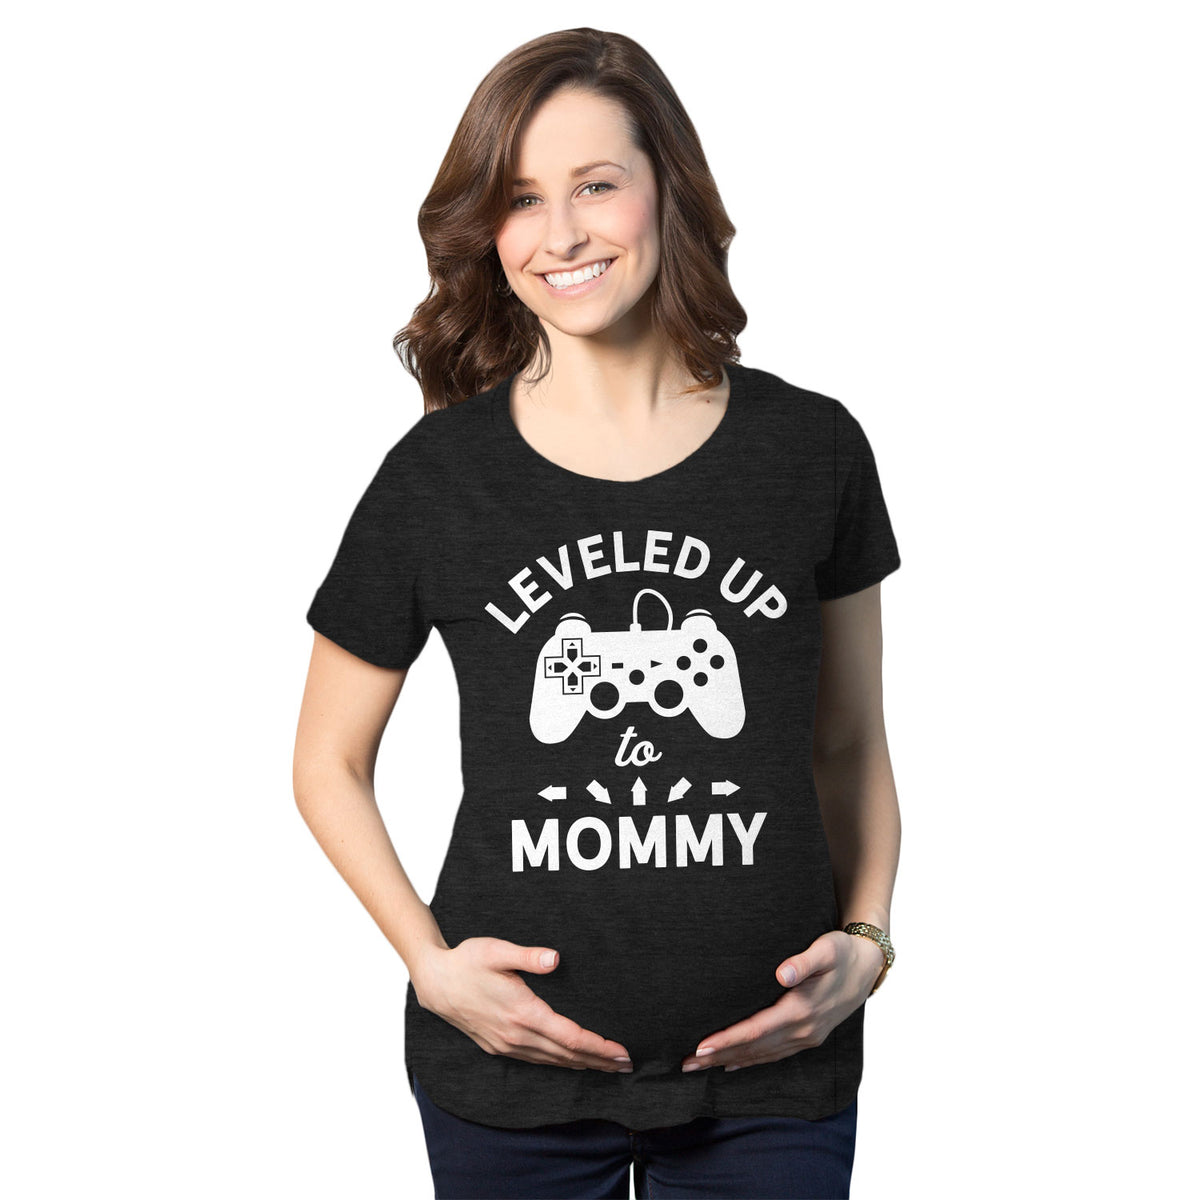 Funny Heather Black Leveled Up To Mommy Maternity T Shirt Nerdy Video Games Nerdy Tee